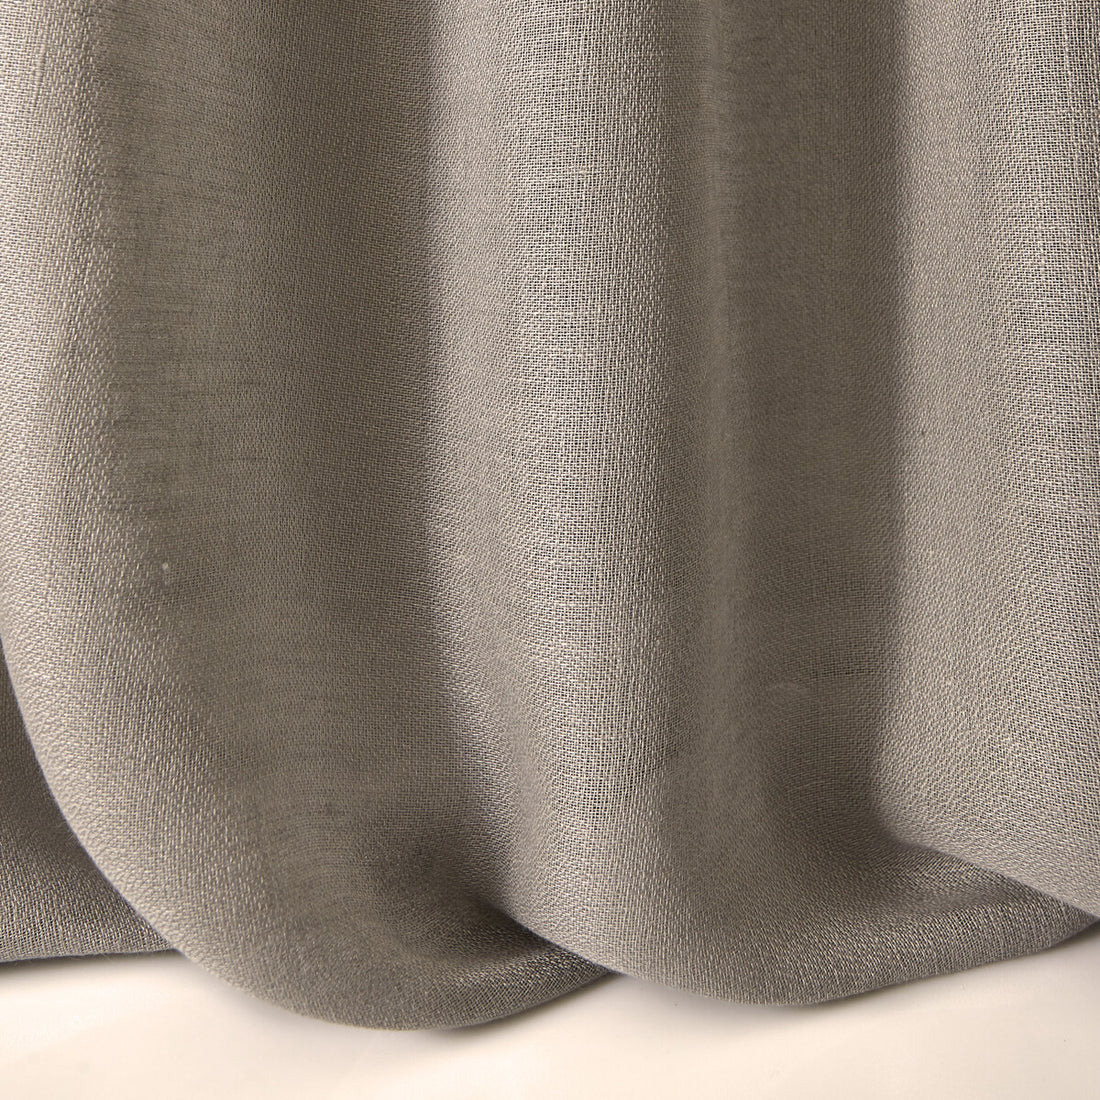 Shenti fabric in 1 color - pattern LZ-30200.01.0 - by Kravet Design in the Lizzo collection